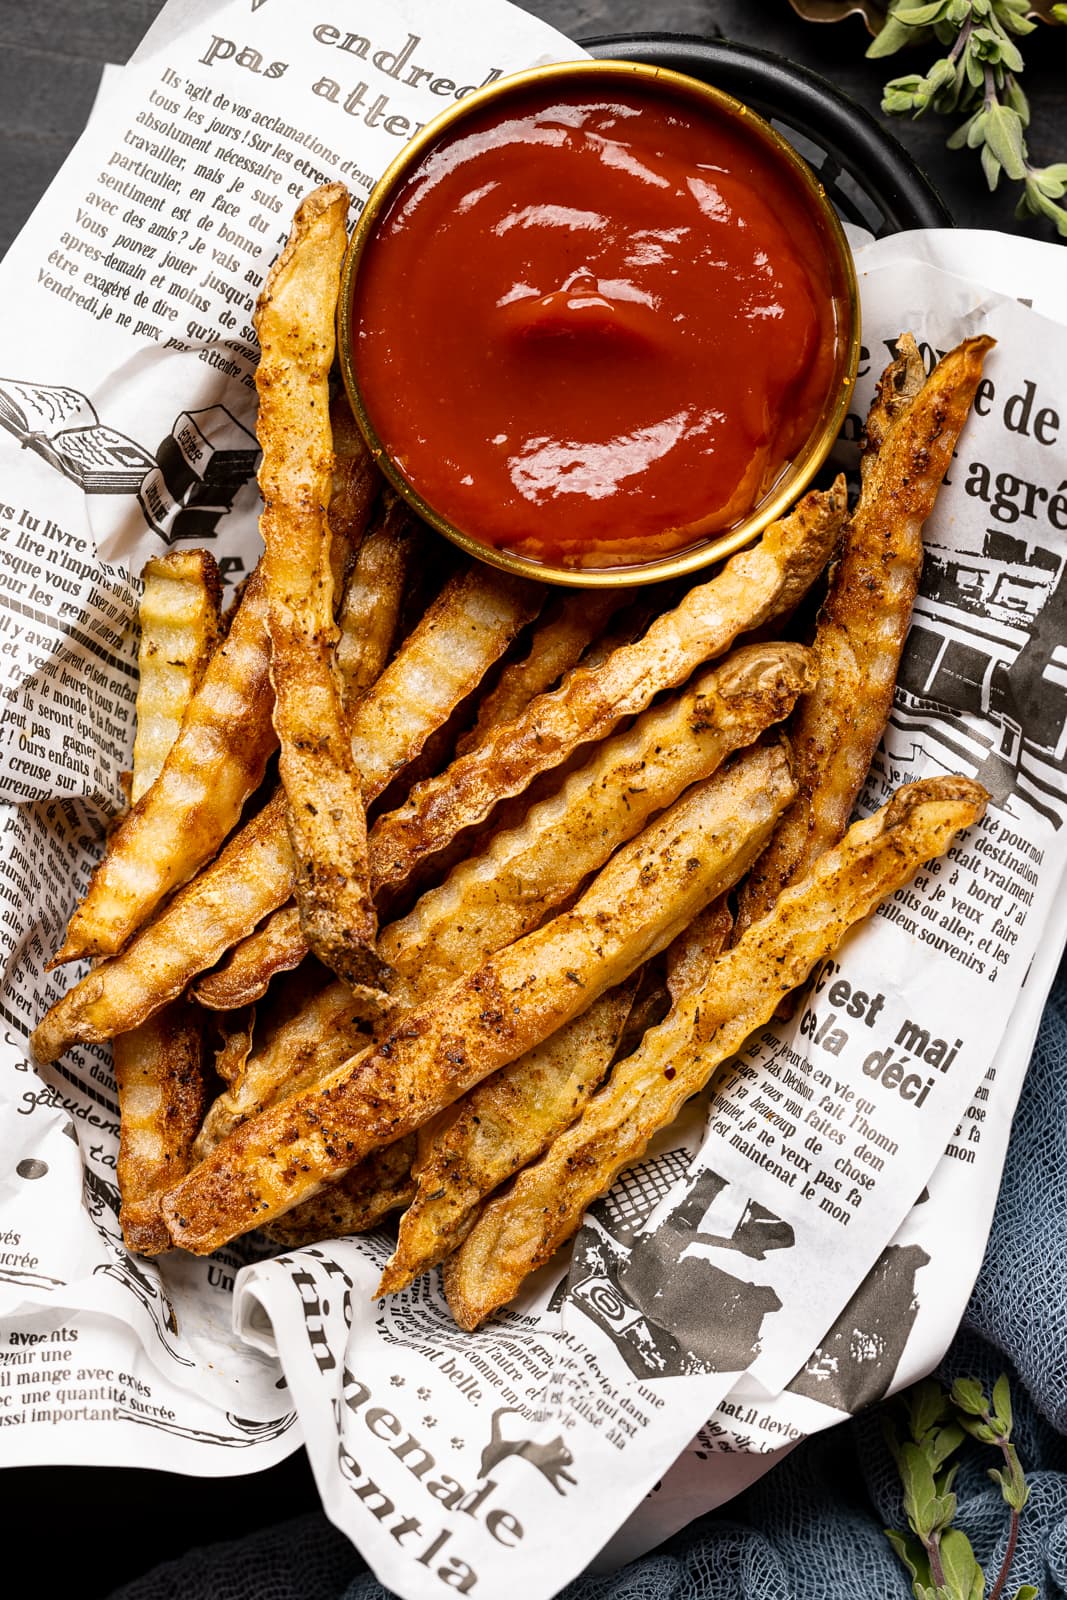 Up close shot of fries in food basket with a side of ketchup.